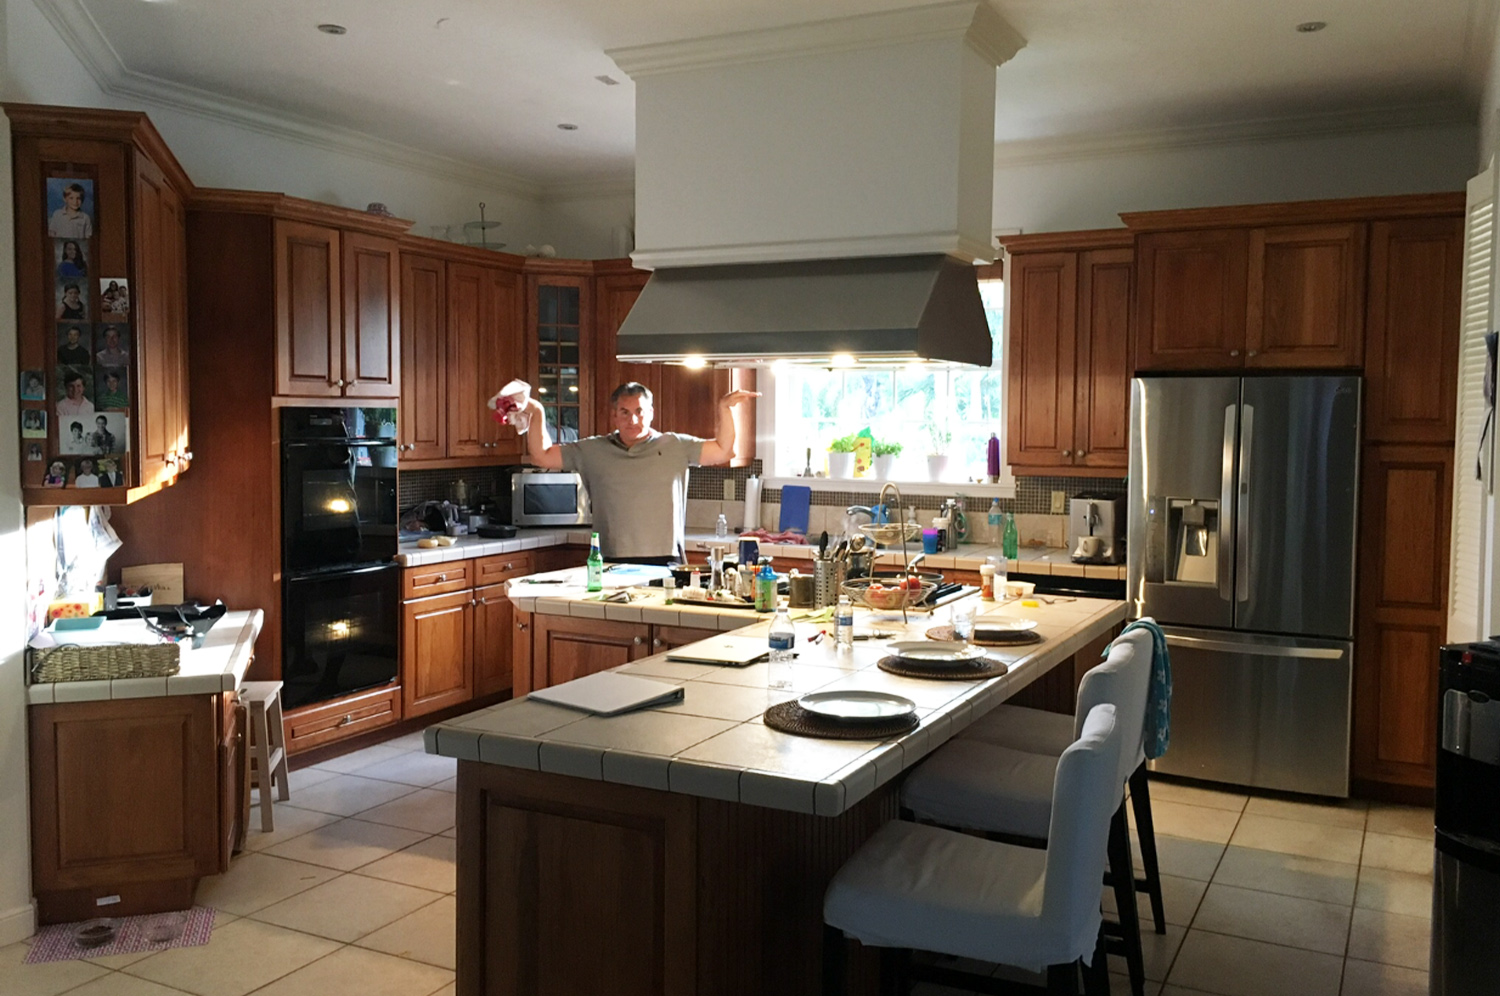 Before - Kitchen Remodel